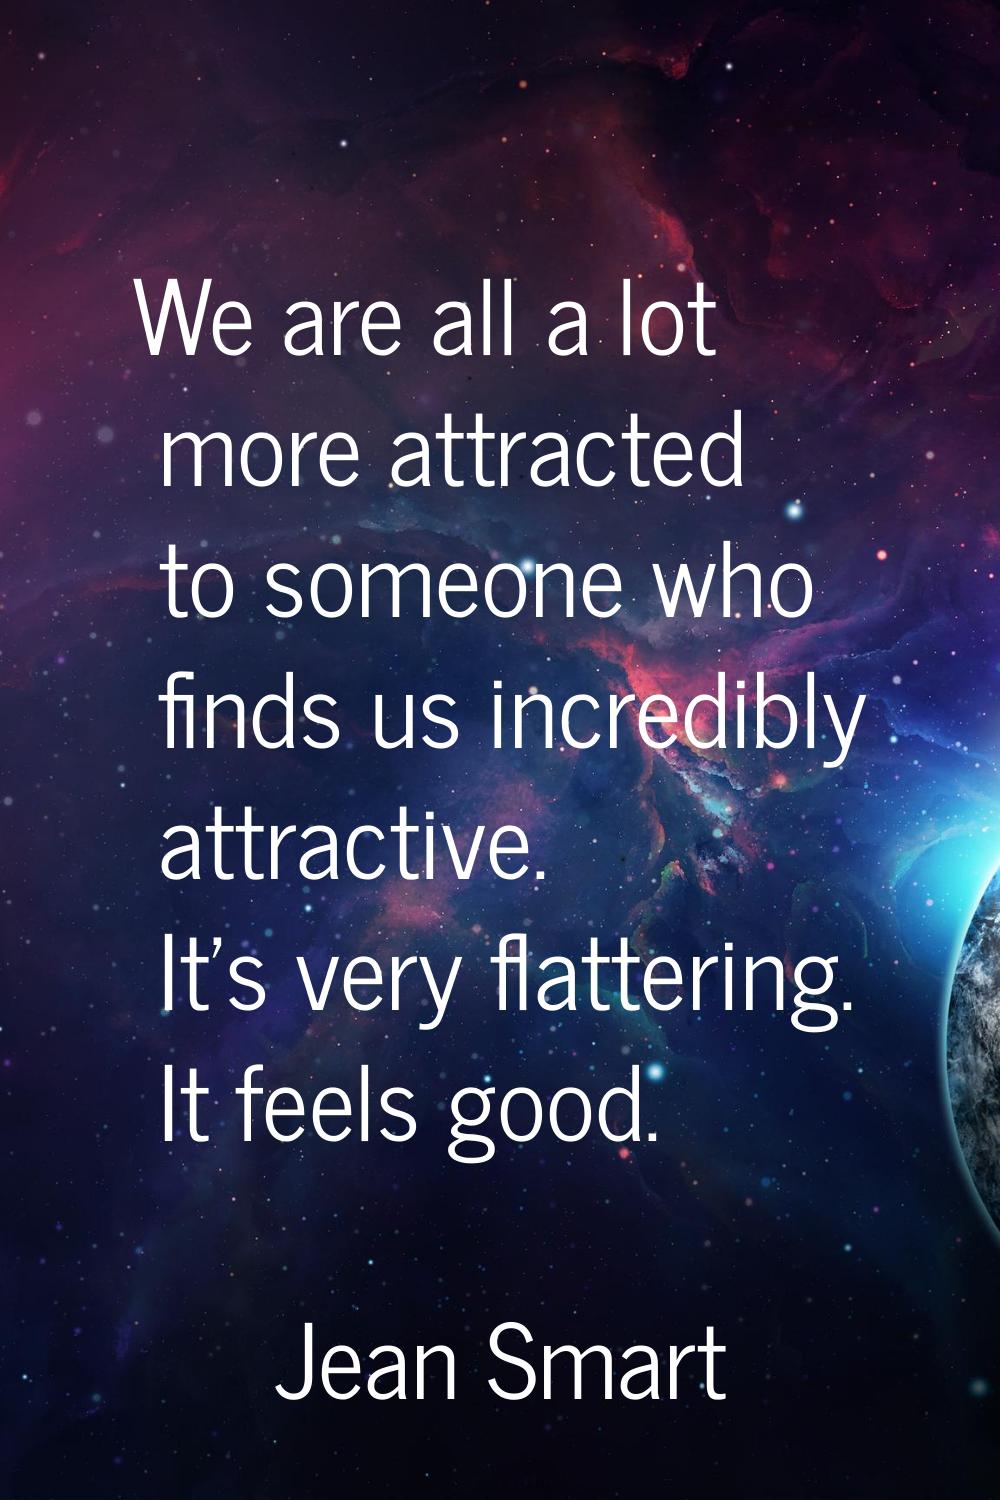 We are all a lot more attracted to someone who finds us incredibly attractive. It's very flattering